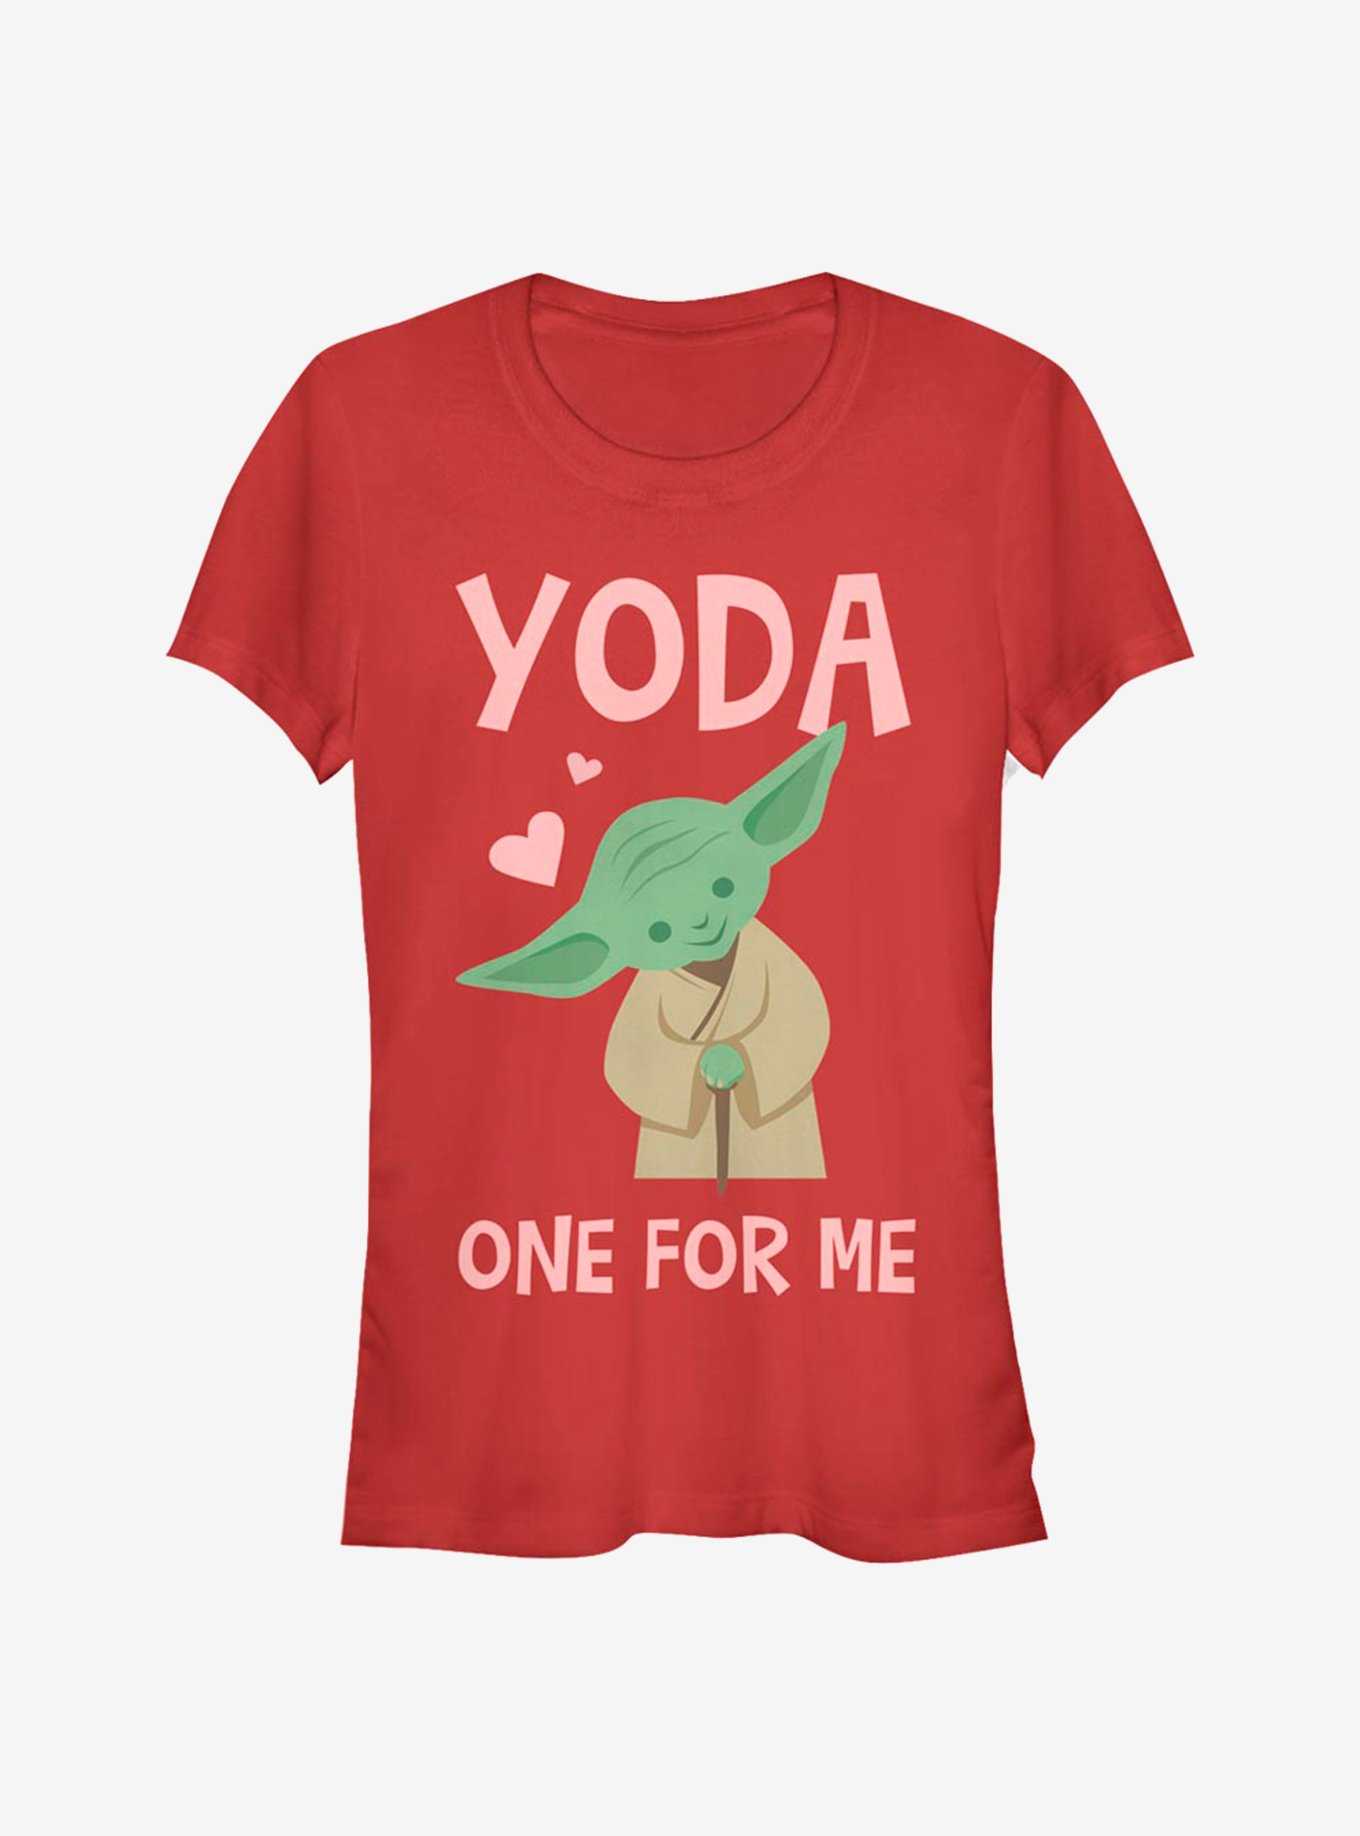 Star Wars Yoda One For Me Girls T-Shirt, , hi-res